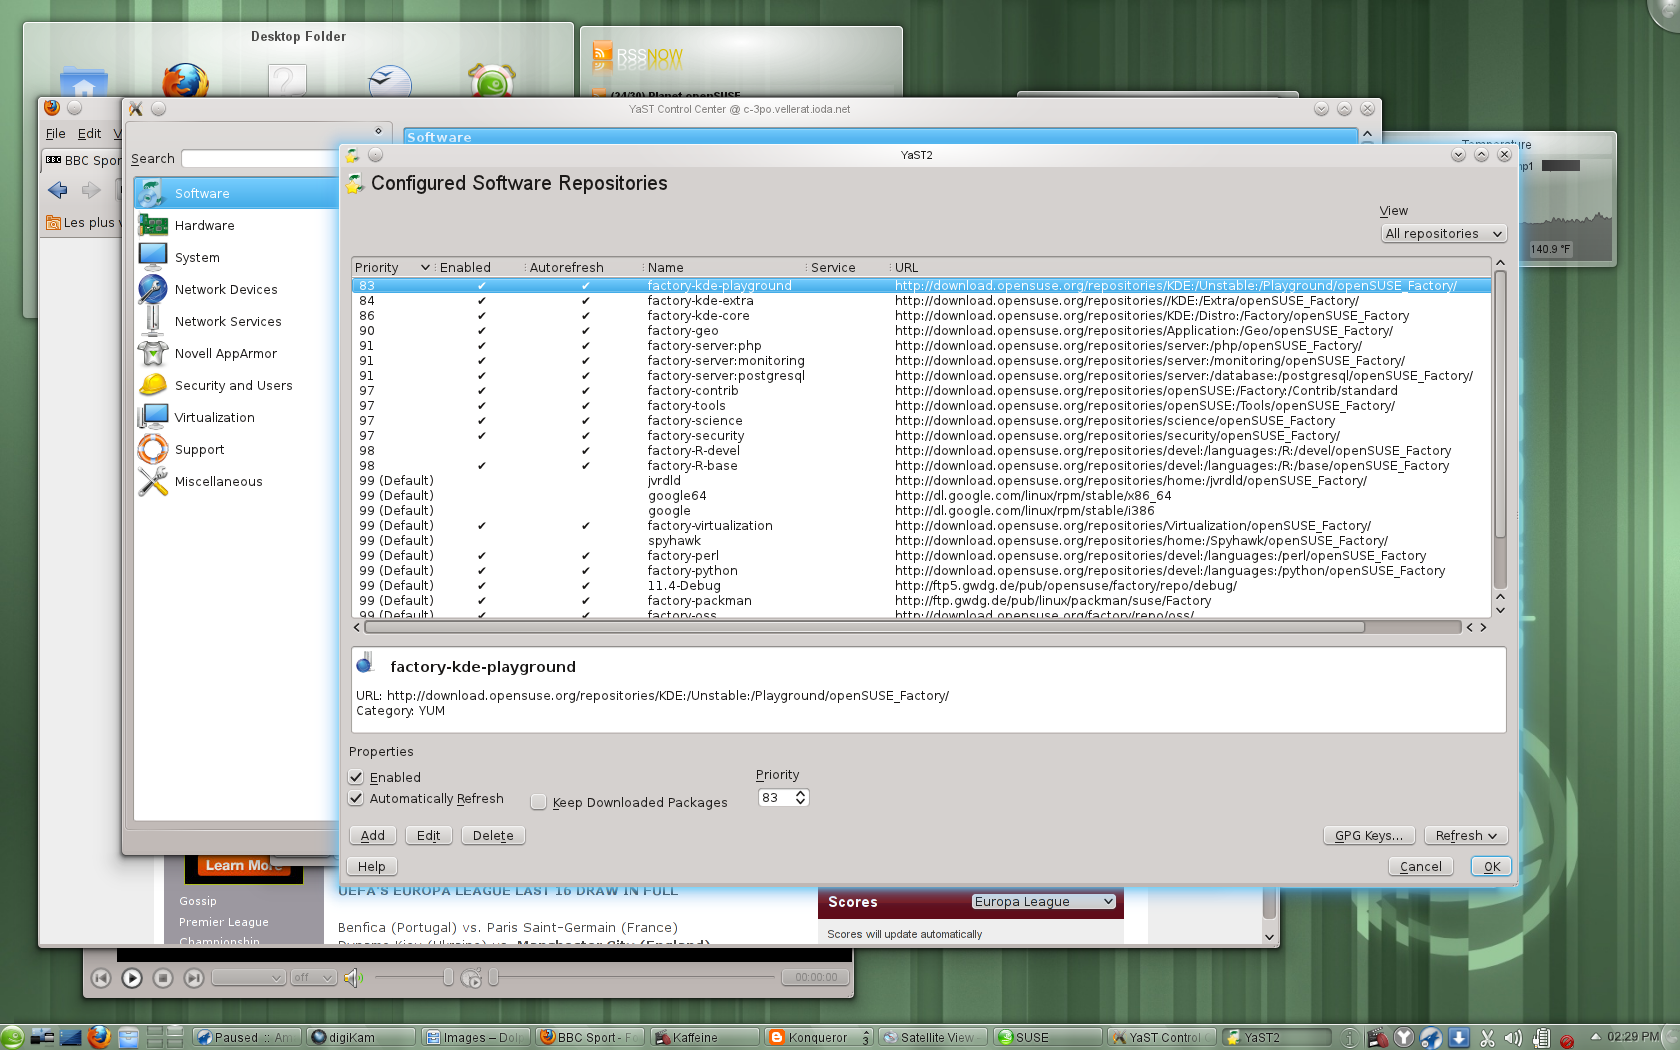 YaST managing repositories in openSUSE 11.4.